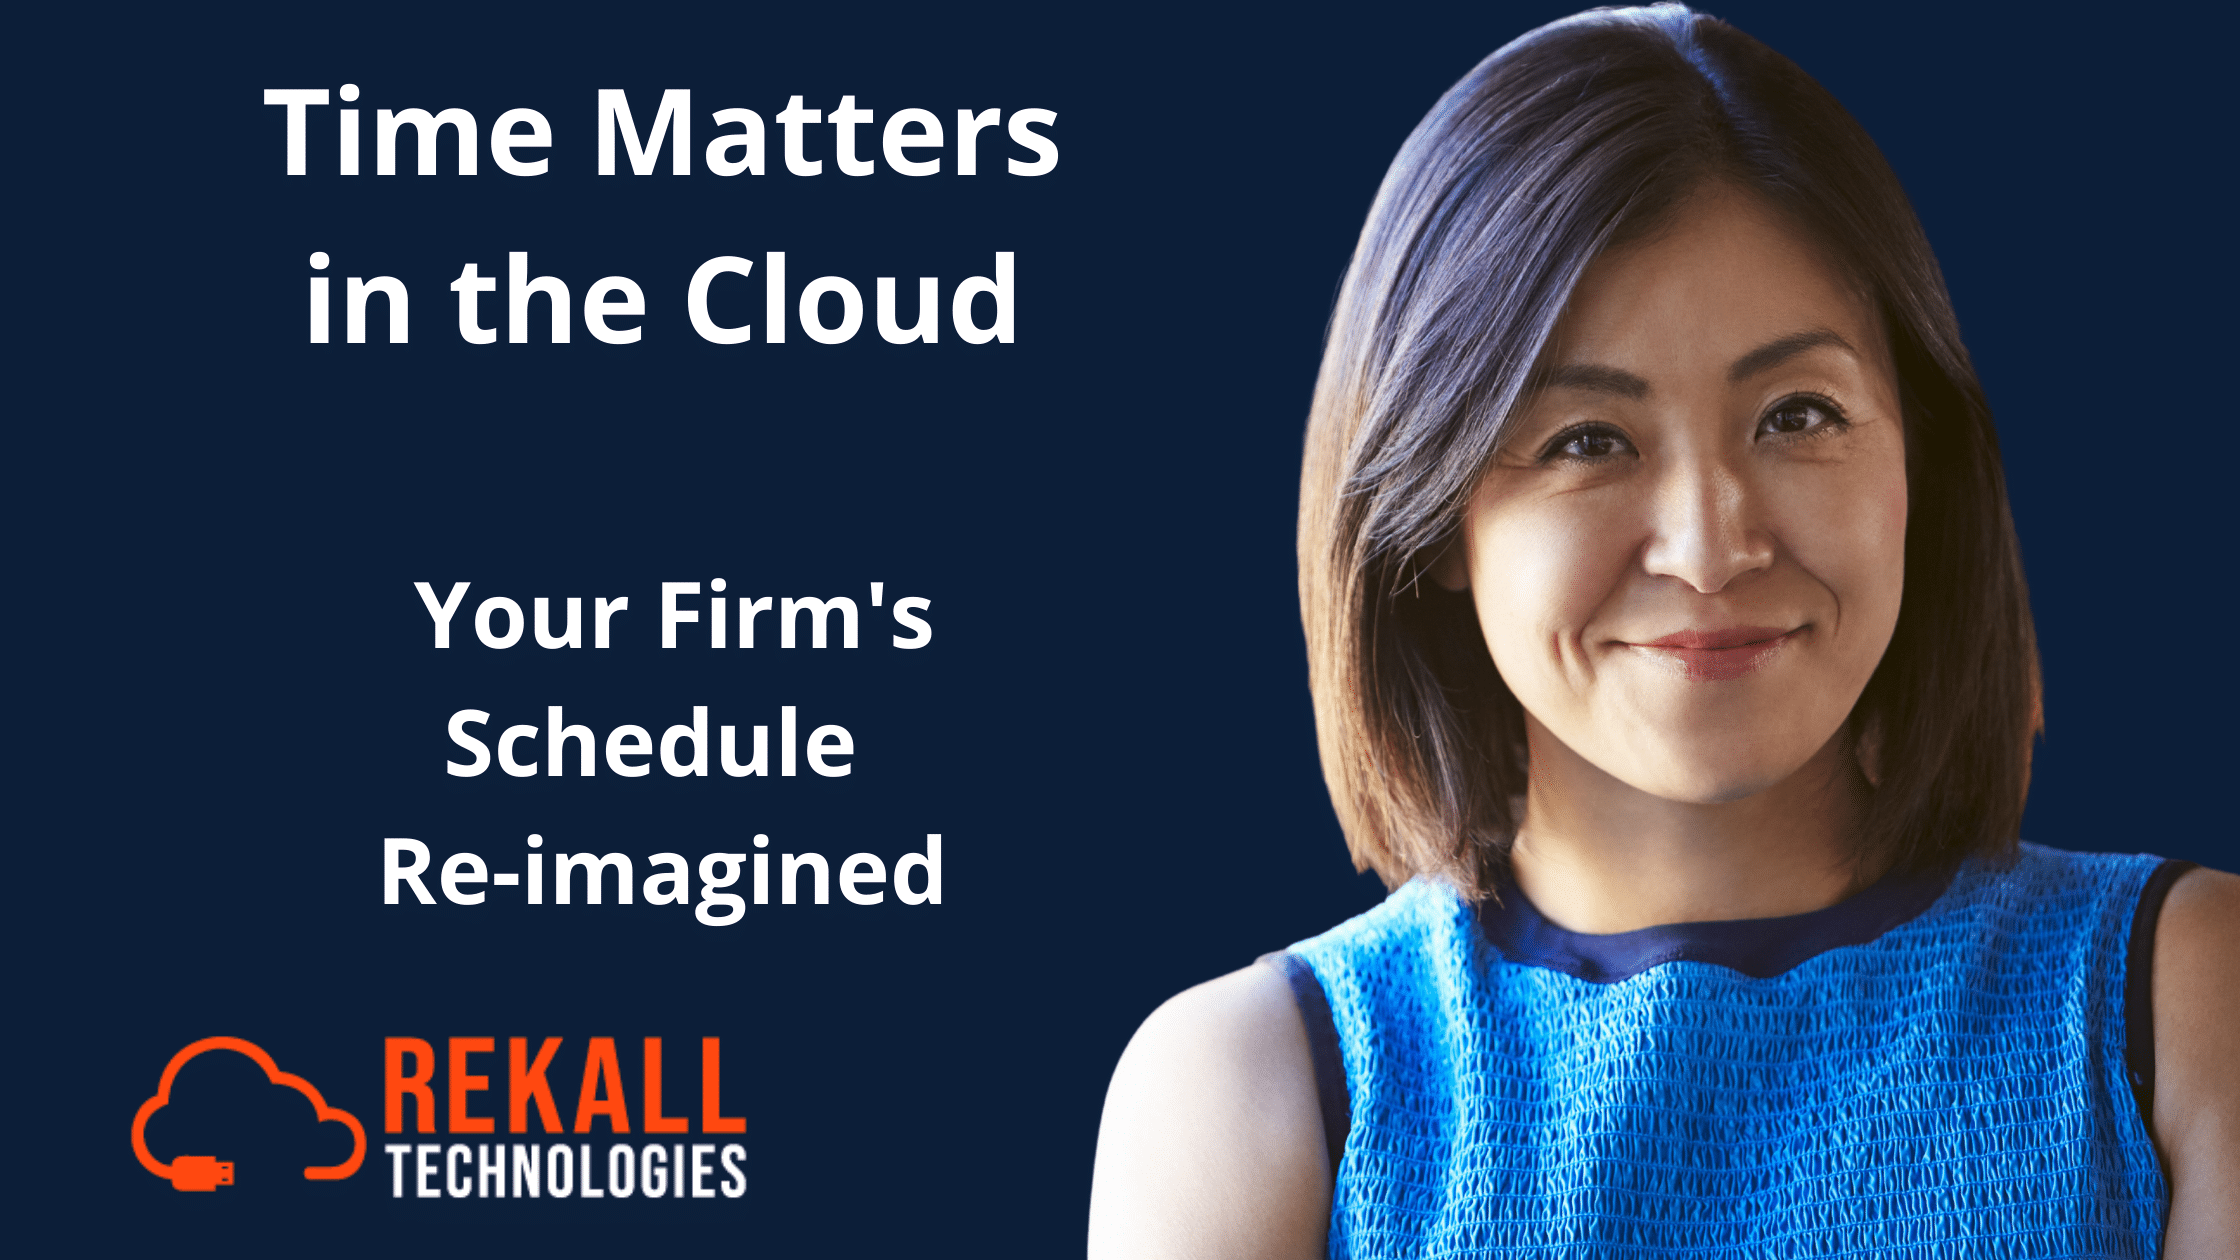 Time Matters in the Cloud